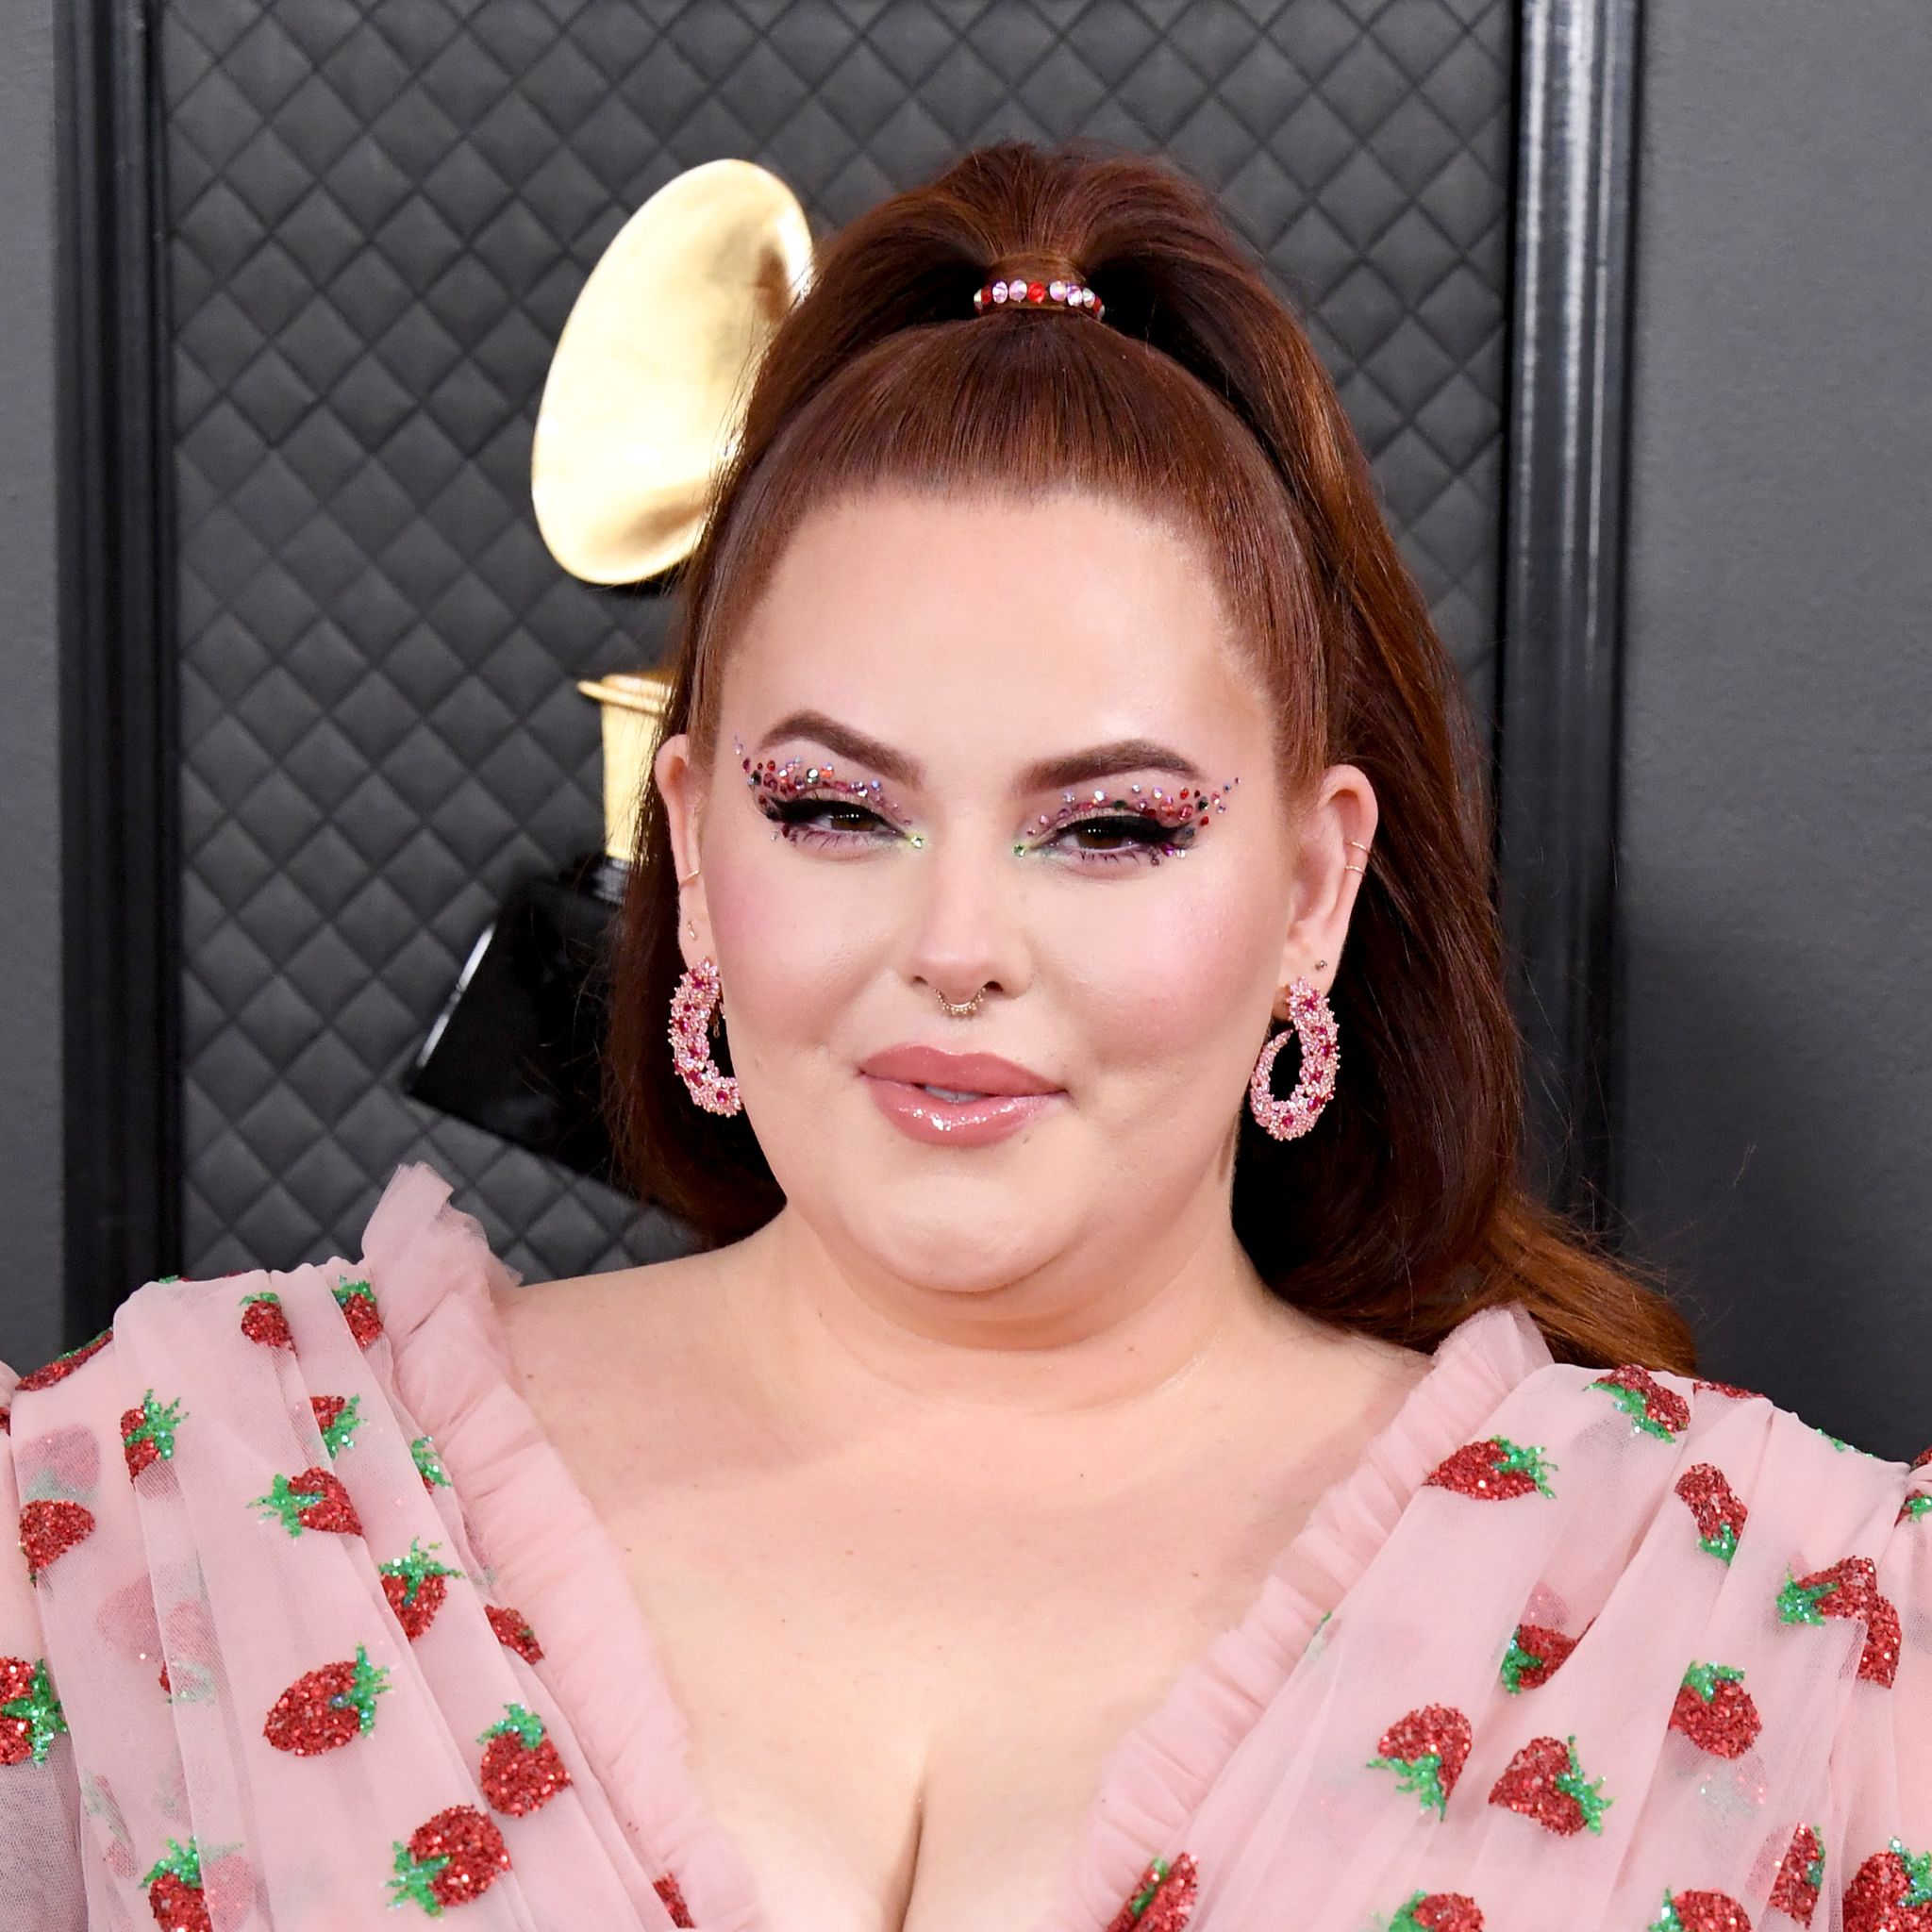 https://hips.hearstapps.com/hmg-prod/images/tess-holliday-opens-up-about-being-in-recovery-from-anorexia-1620293315.jpg?crop=1xw:0.6665xh;center,top&resize=2048:*